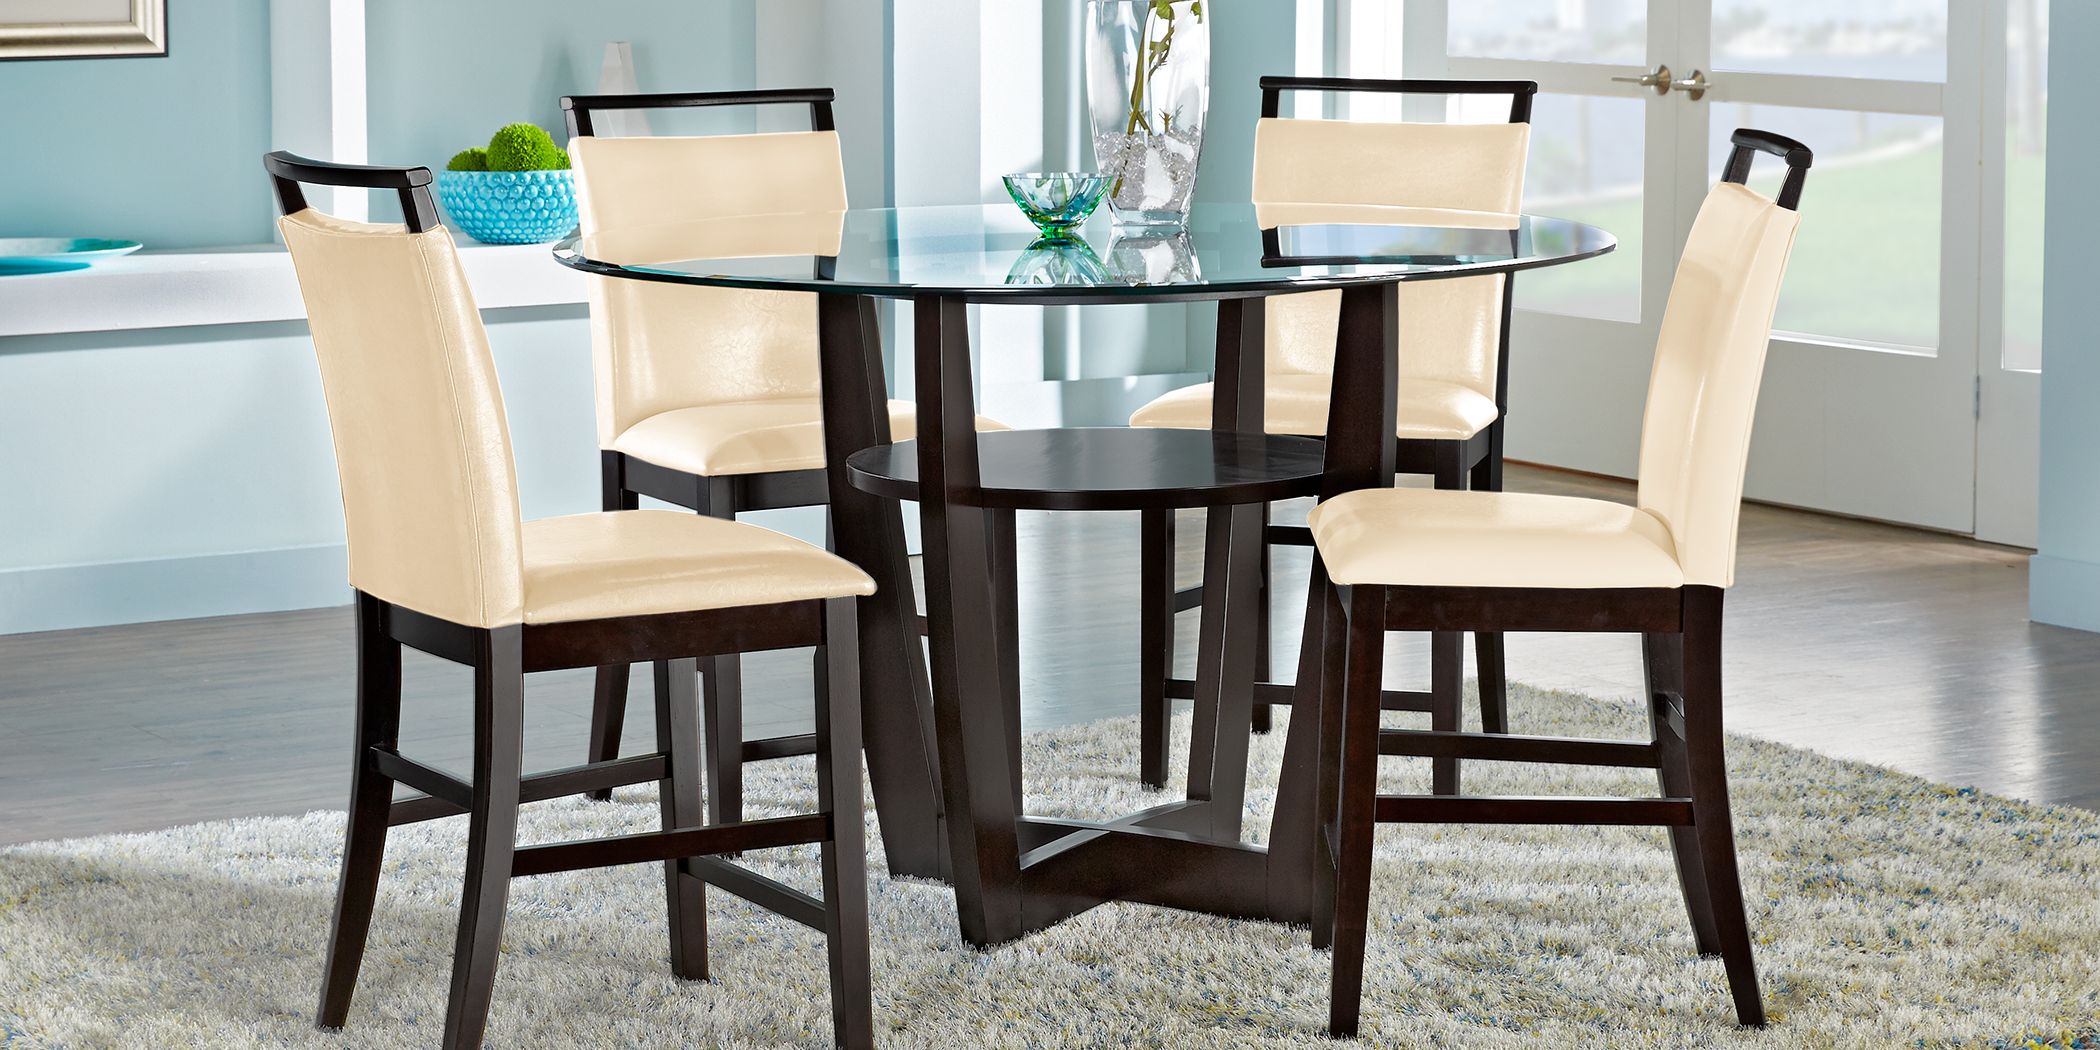 Glass Dining Table Sets, Glass High Top Table And Chairs